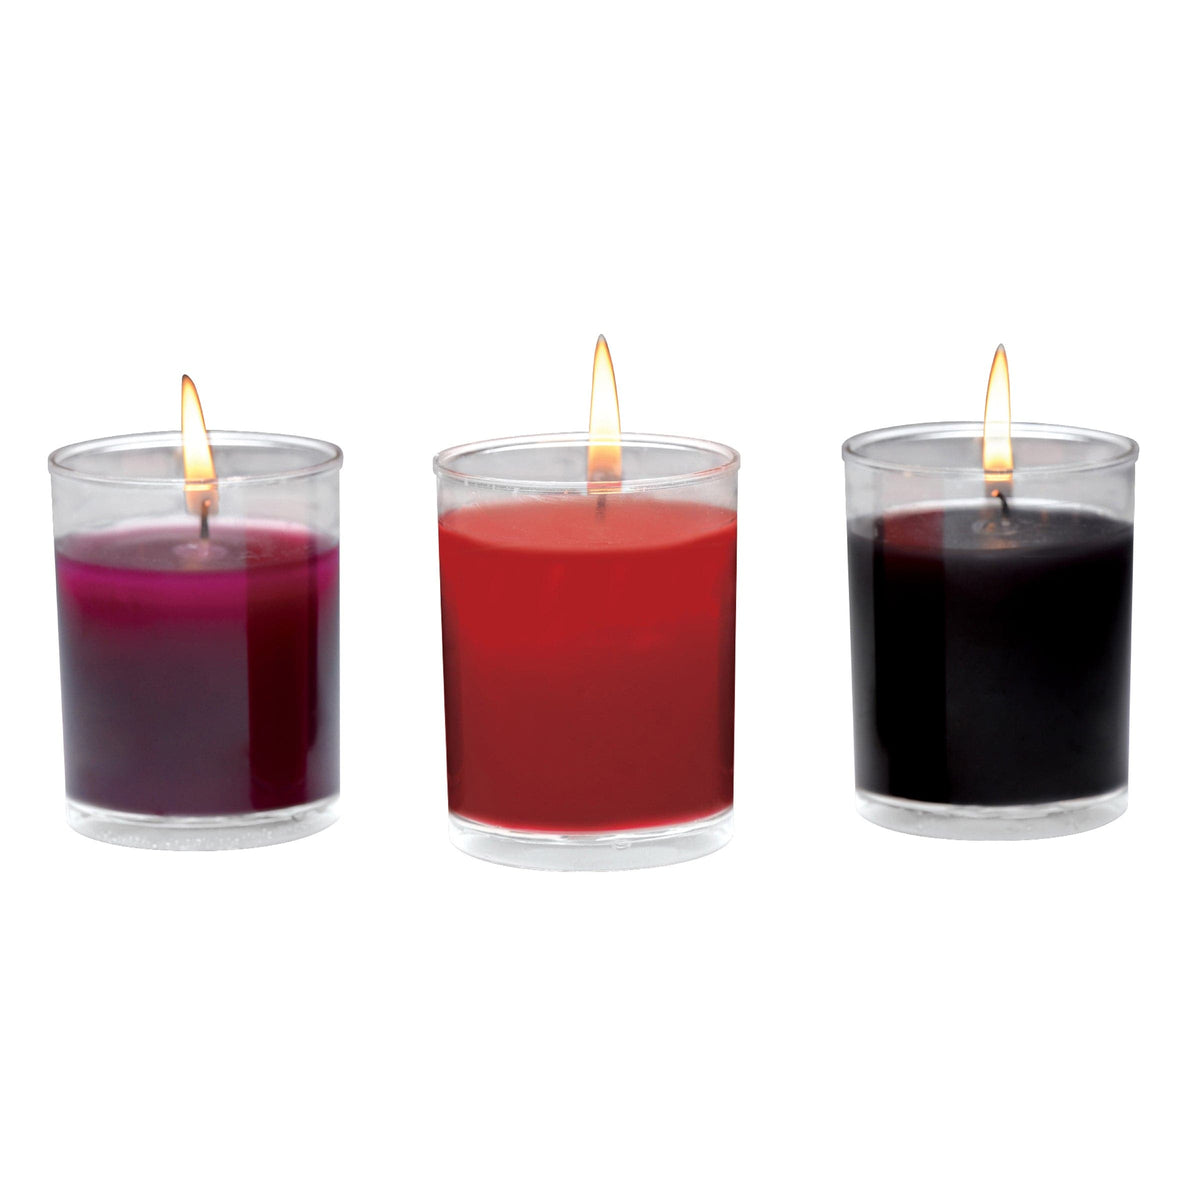 top rated sex toys, best candles